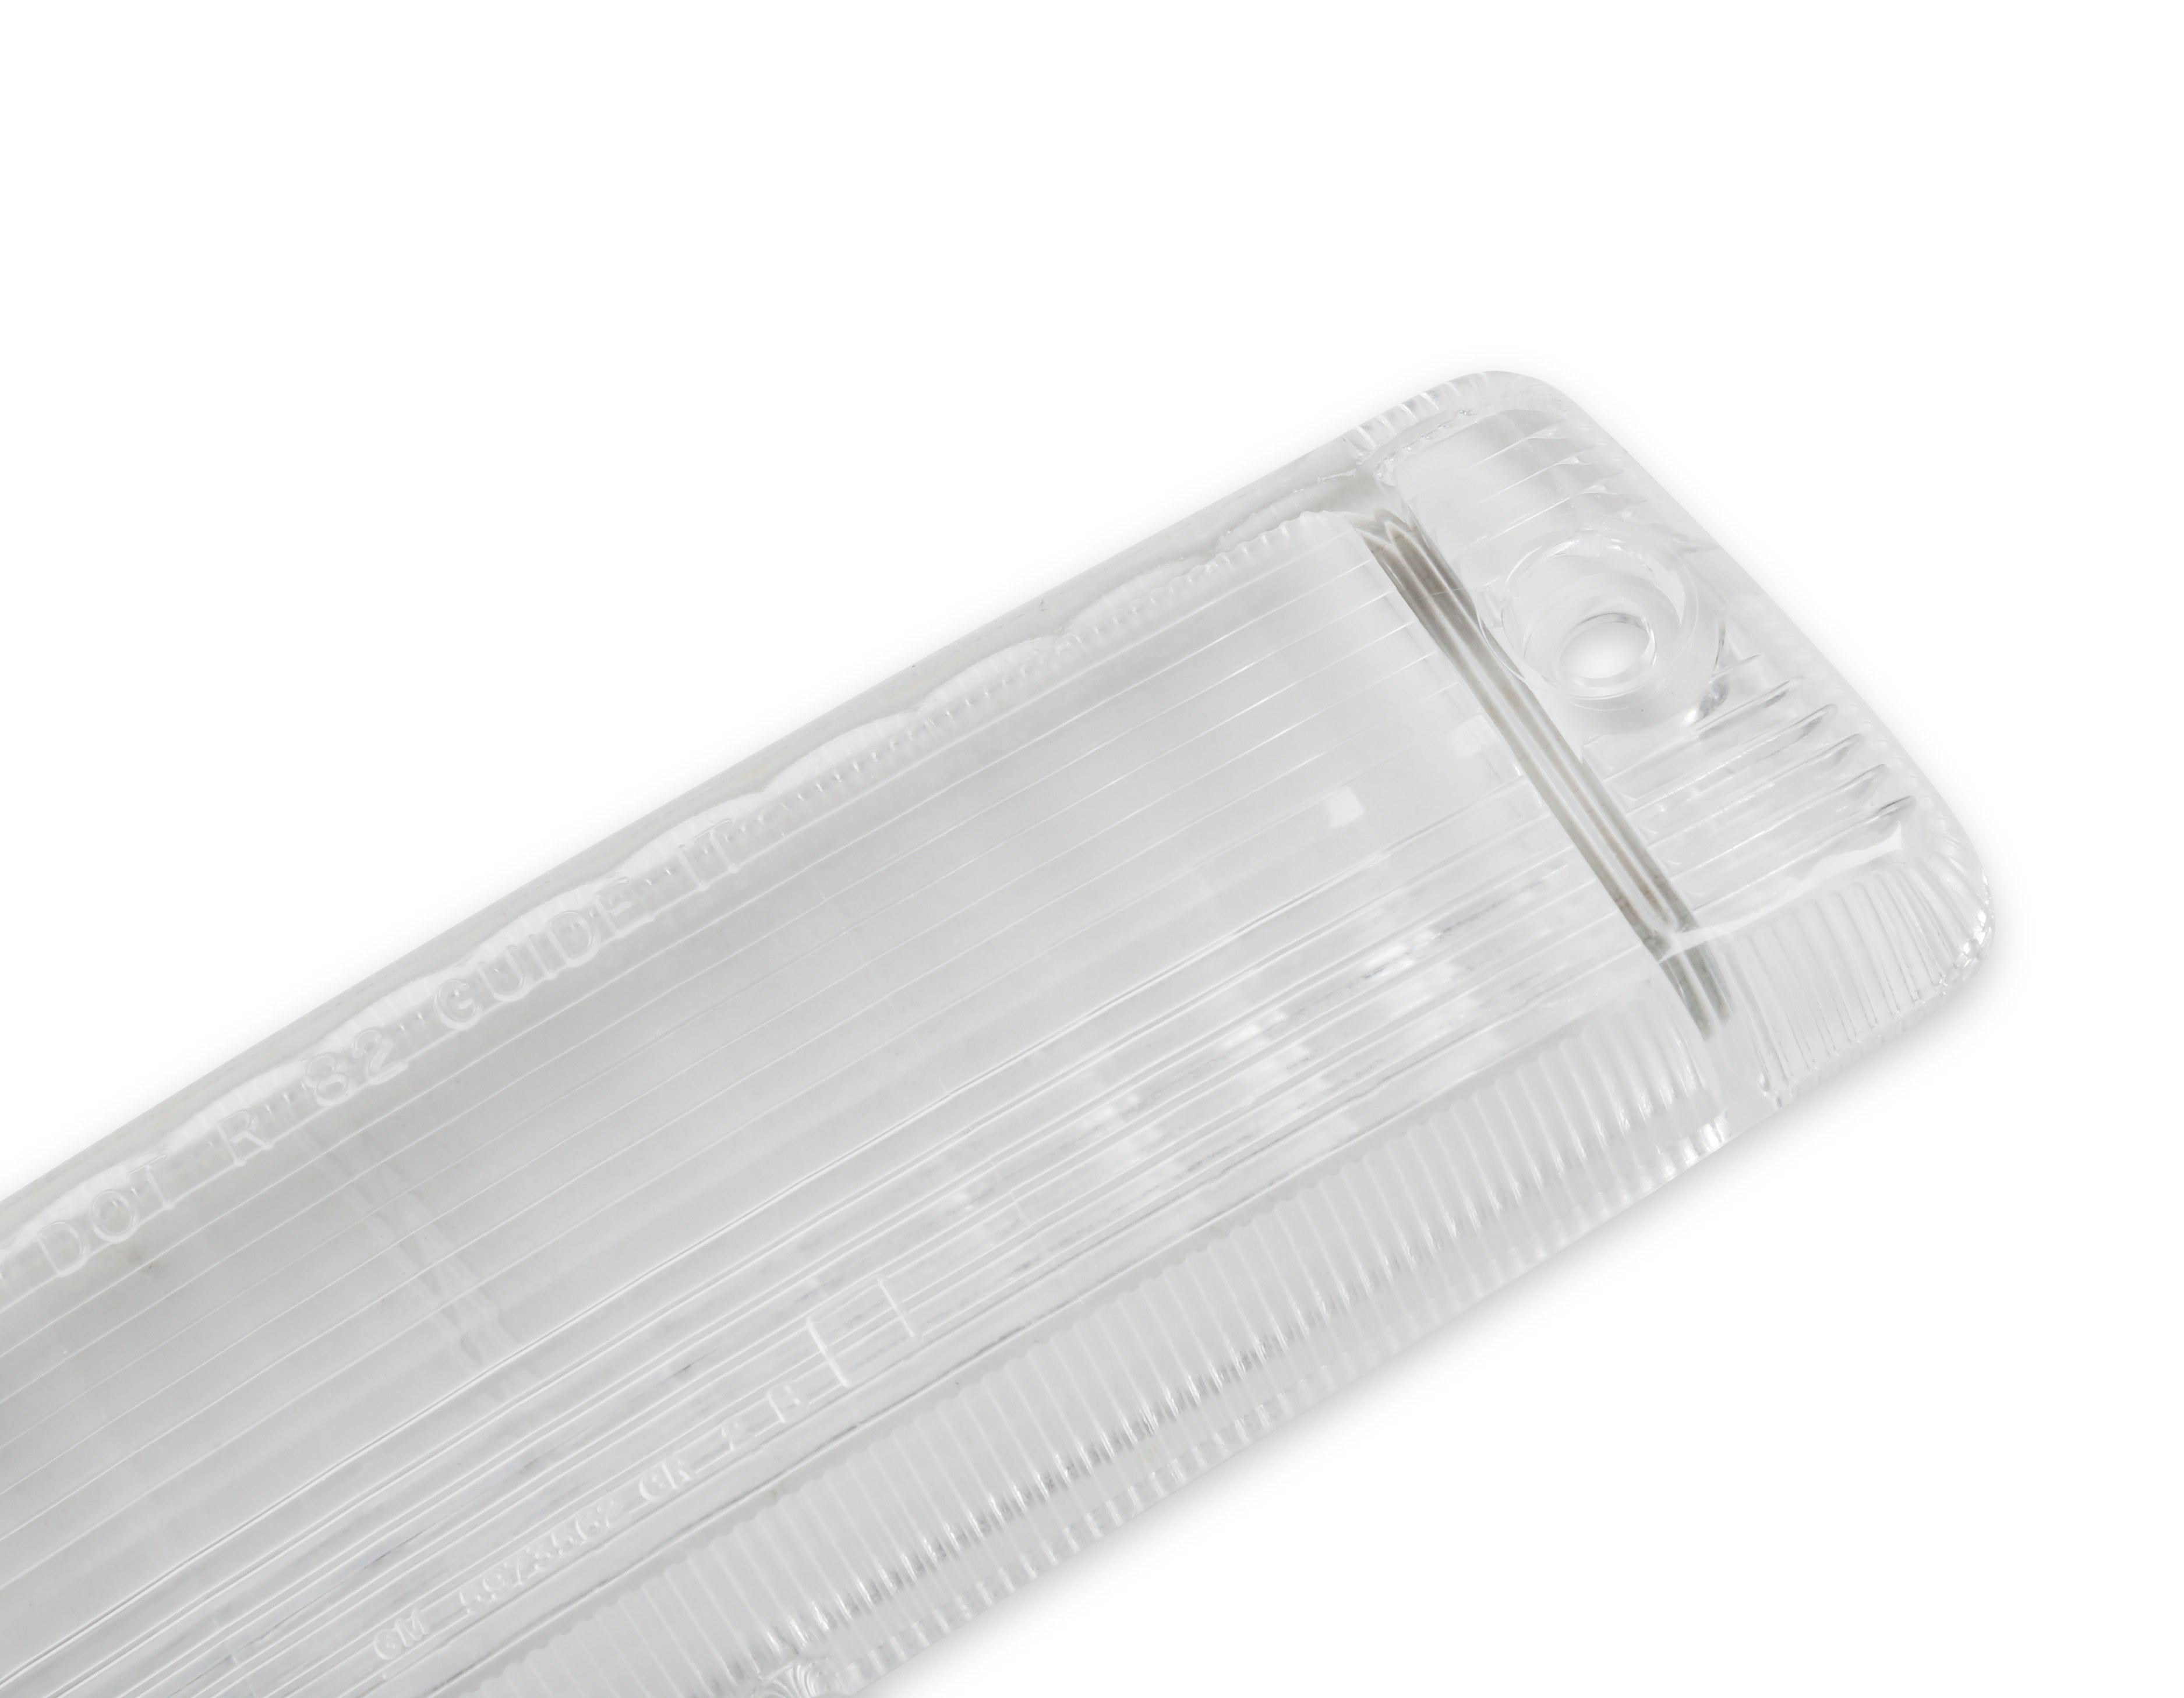 BROTHERS C/K Cargo Light Lens - Clear pn 07-143